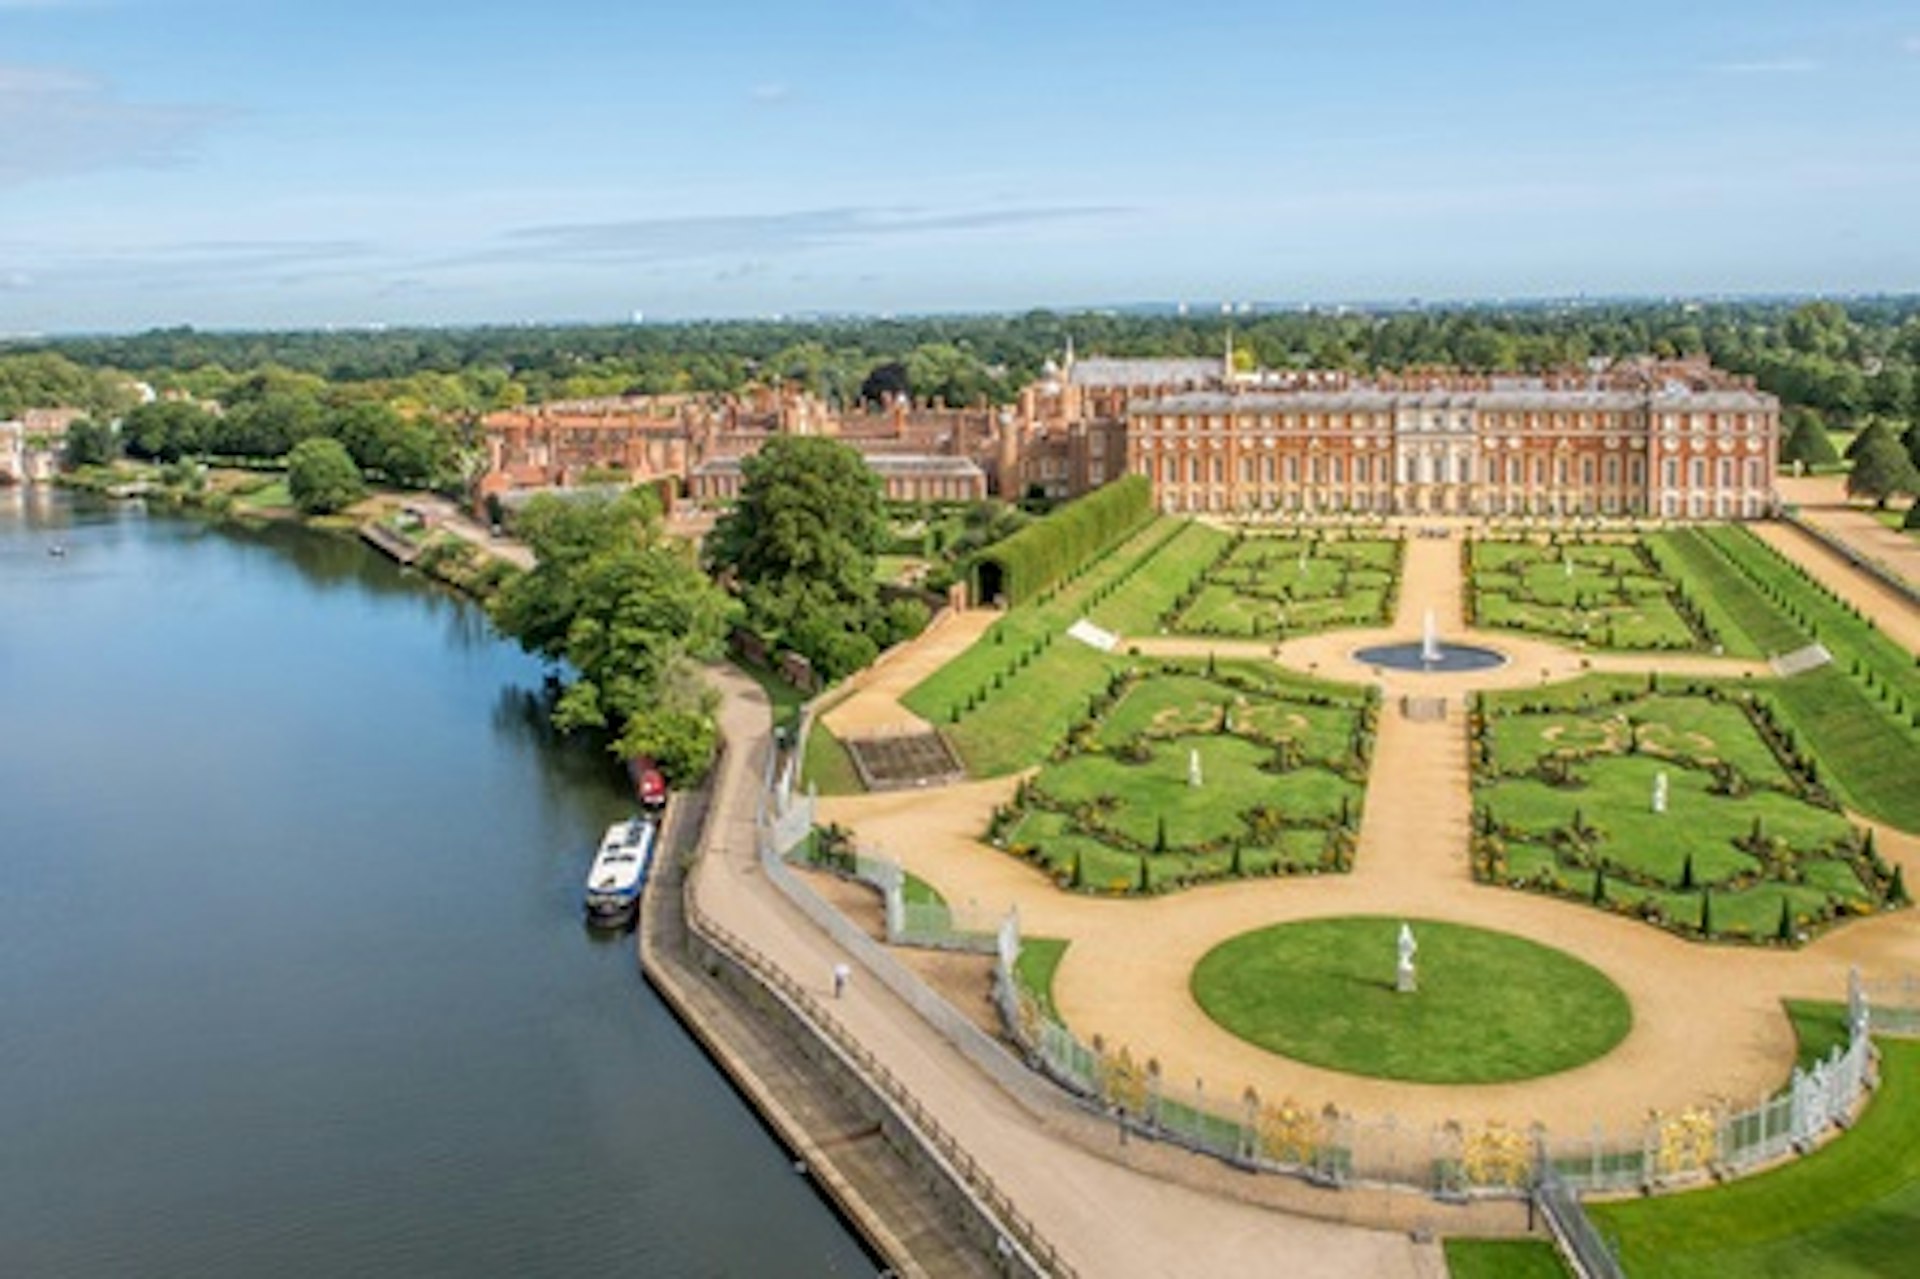 Visit to Hampton Court Palace for One Adult and One Child 1